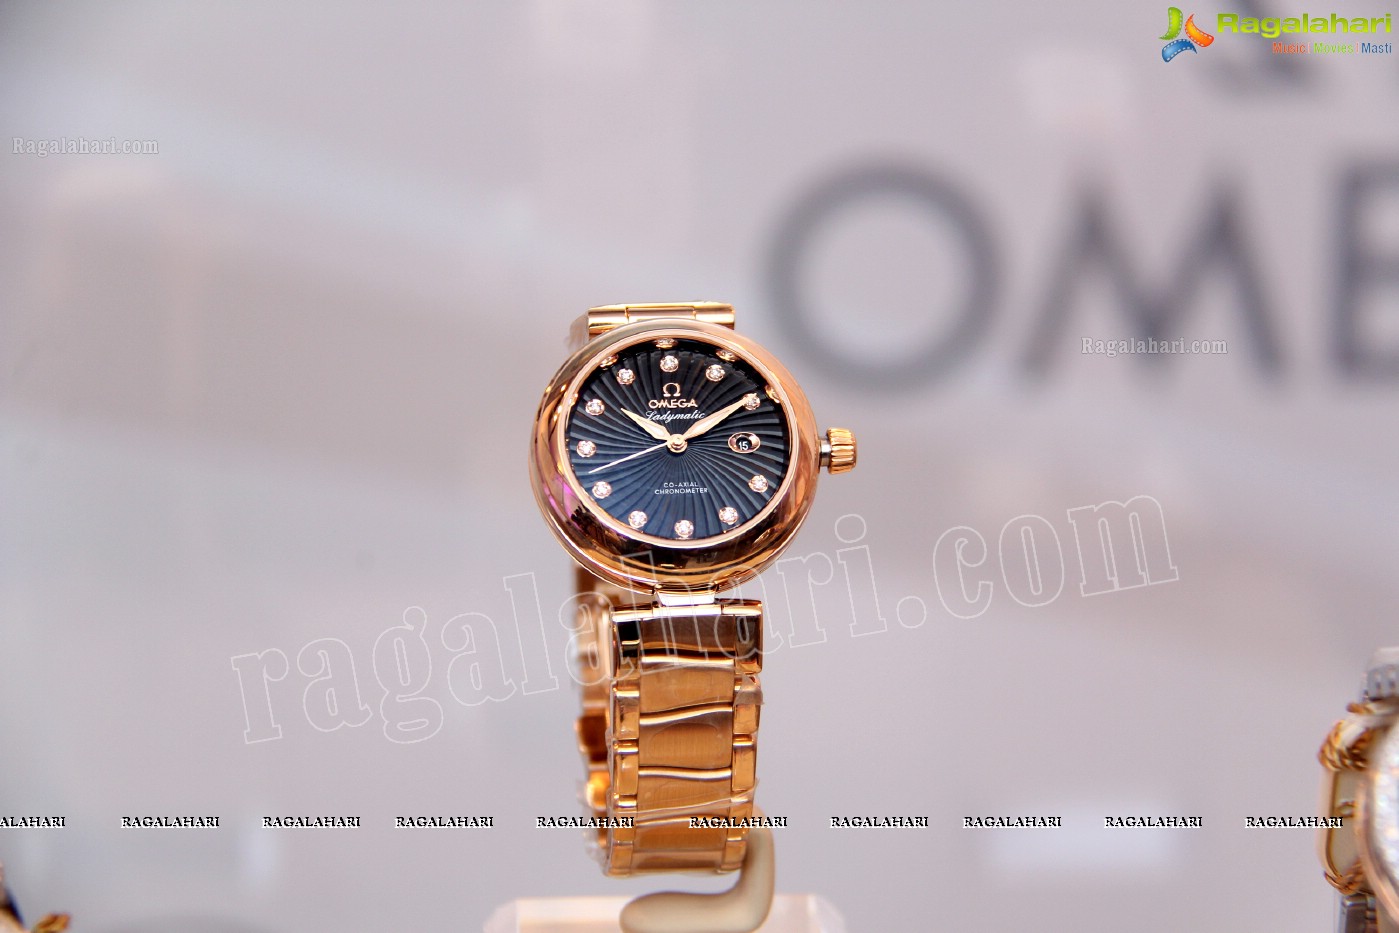 Omega launches 'Ladymatic' Range Timepieces, Hyderabad